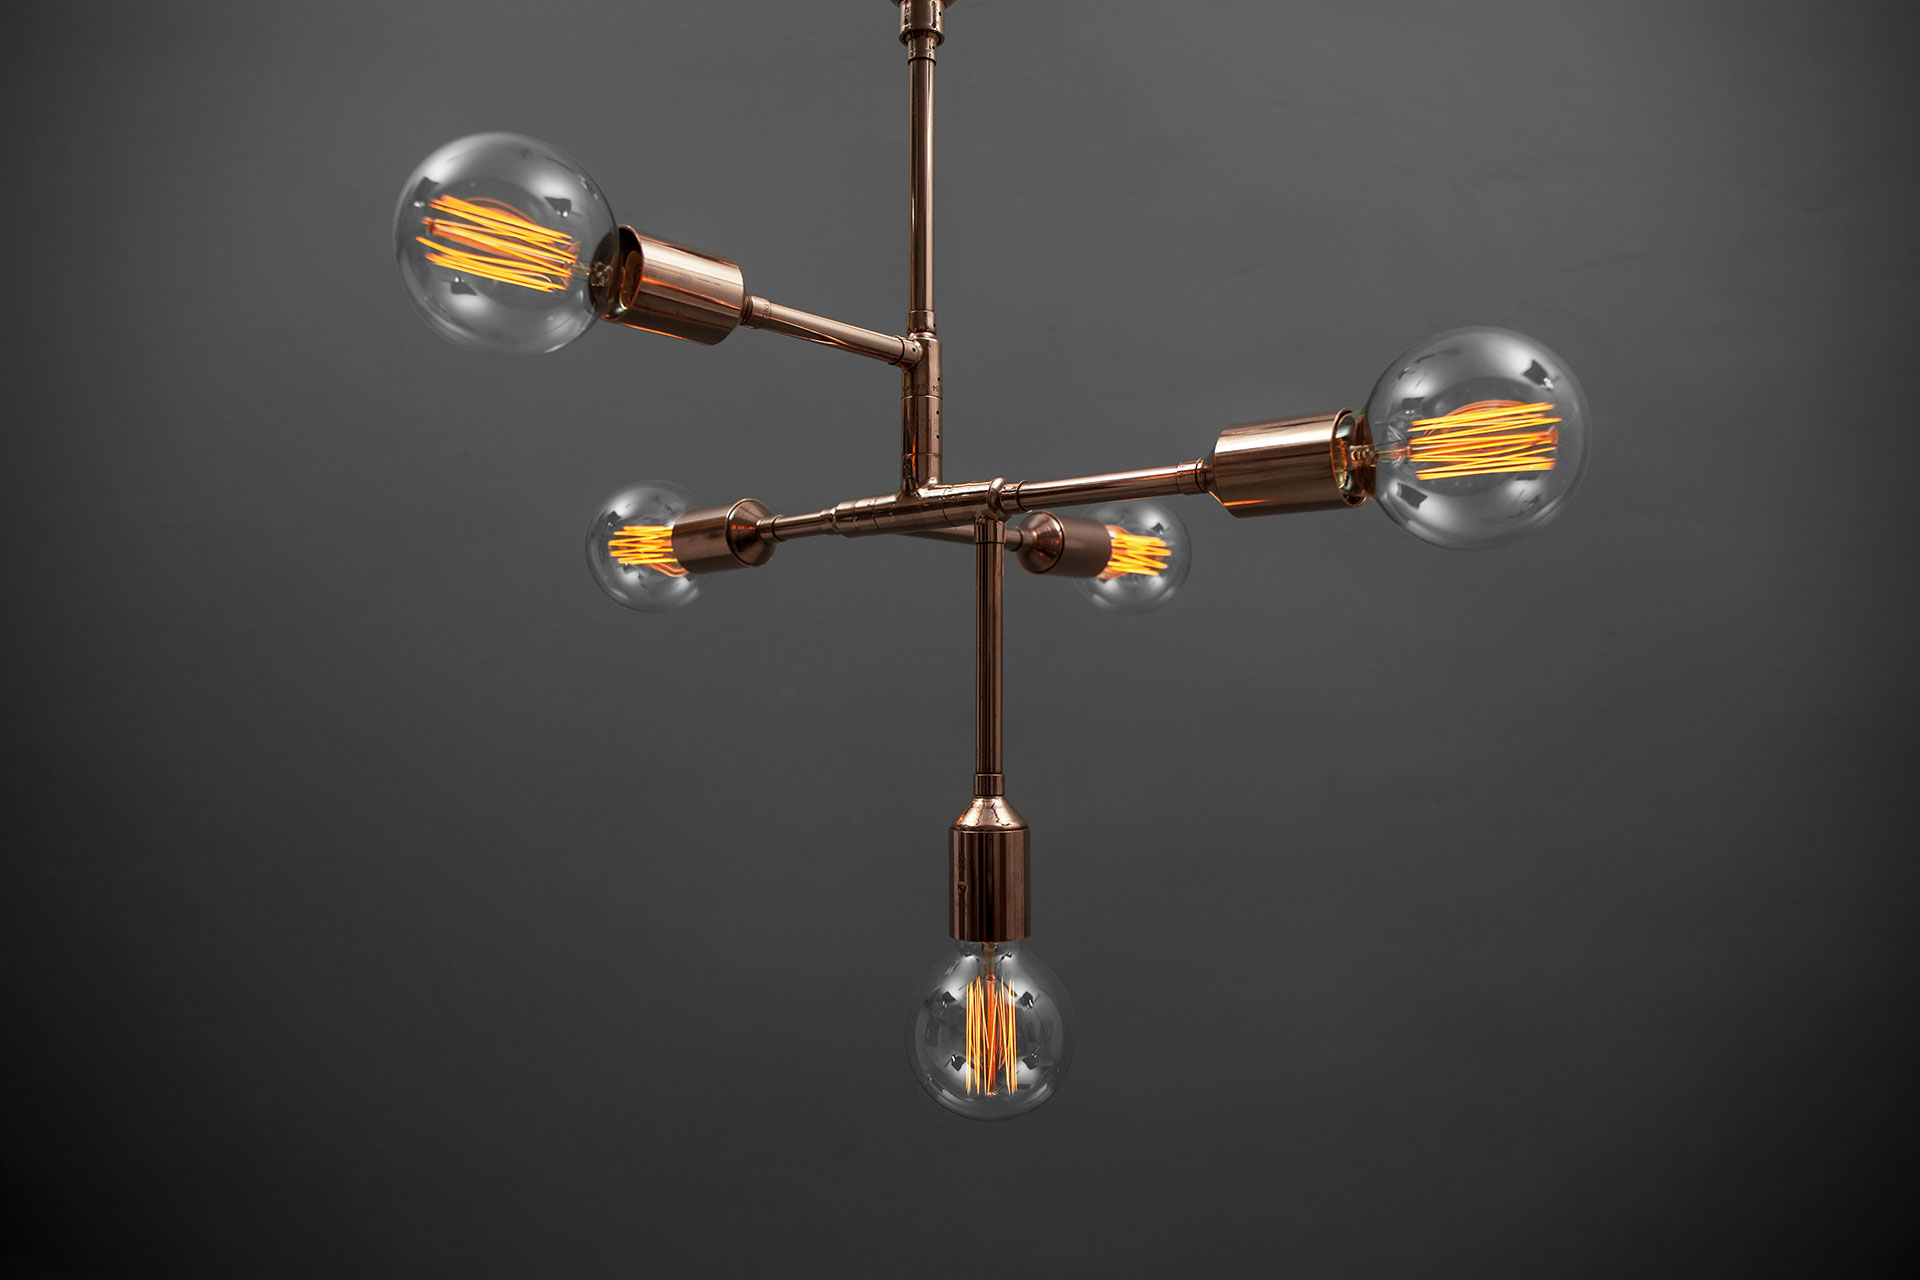 Conceptual design ceiling lamp in copper or brass with Edison bulbs